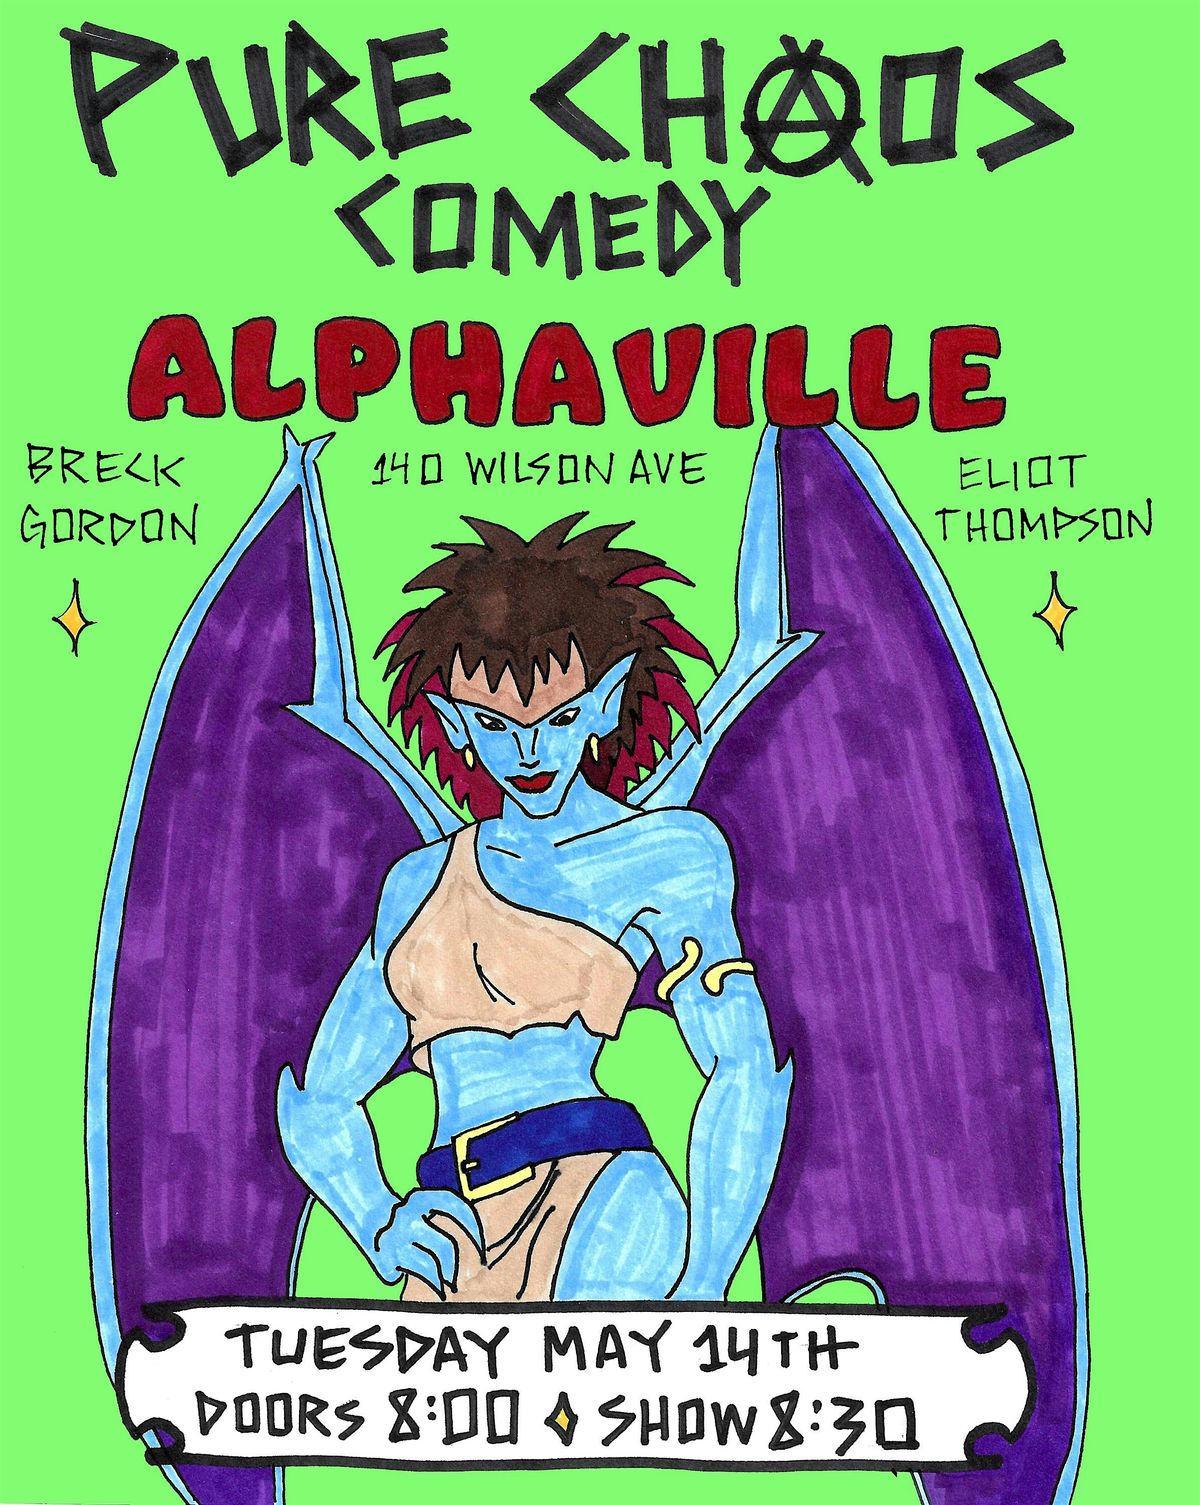 Pure Chaos Comedy at Alphaville